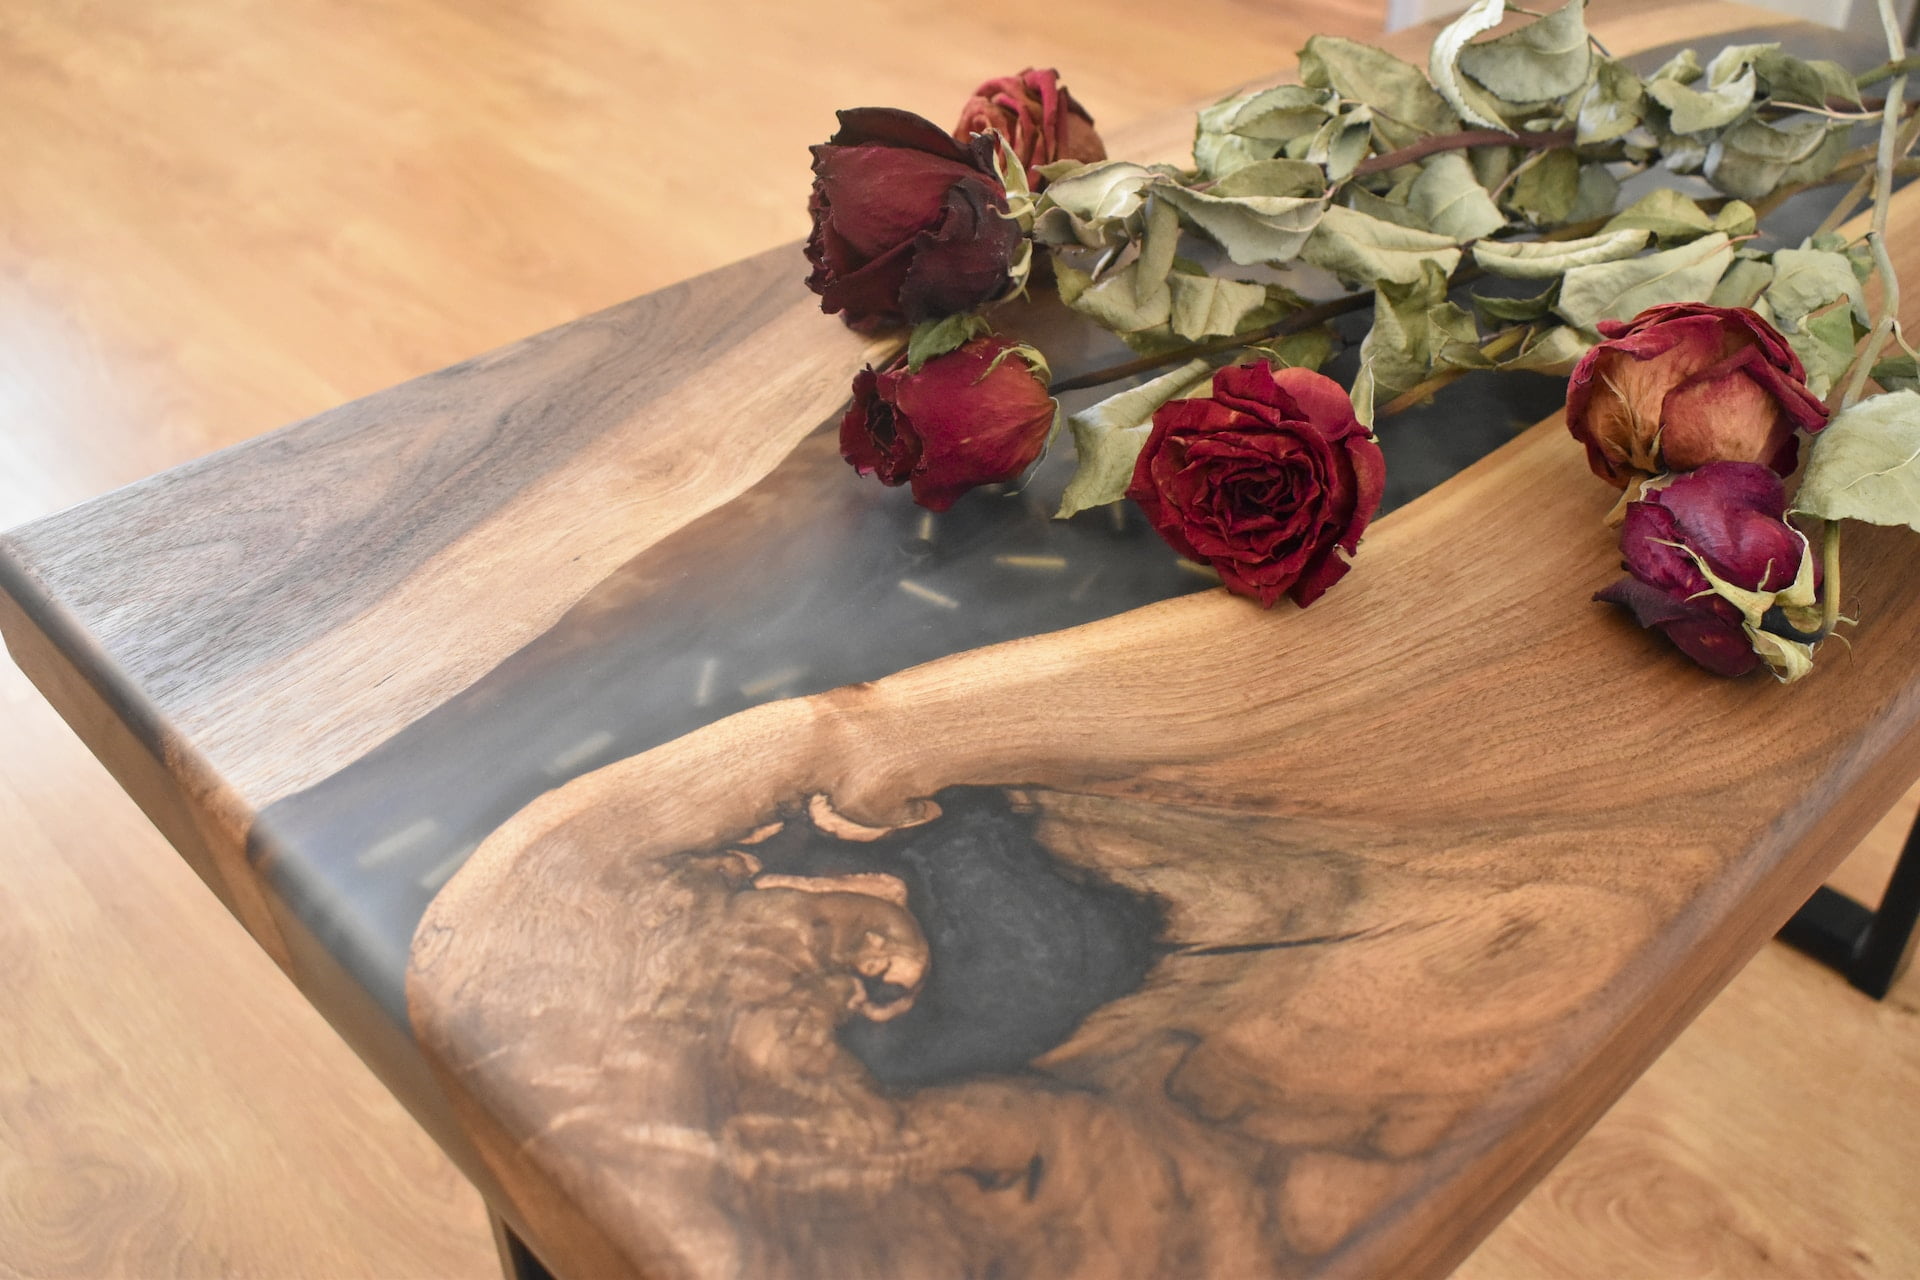 How We Make a River Table: Crafting Nature's Flow into Functional Art